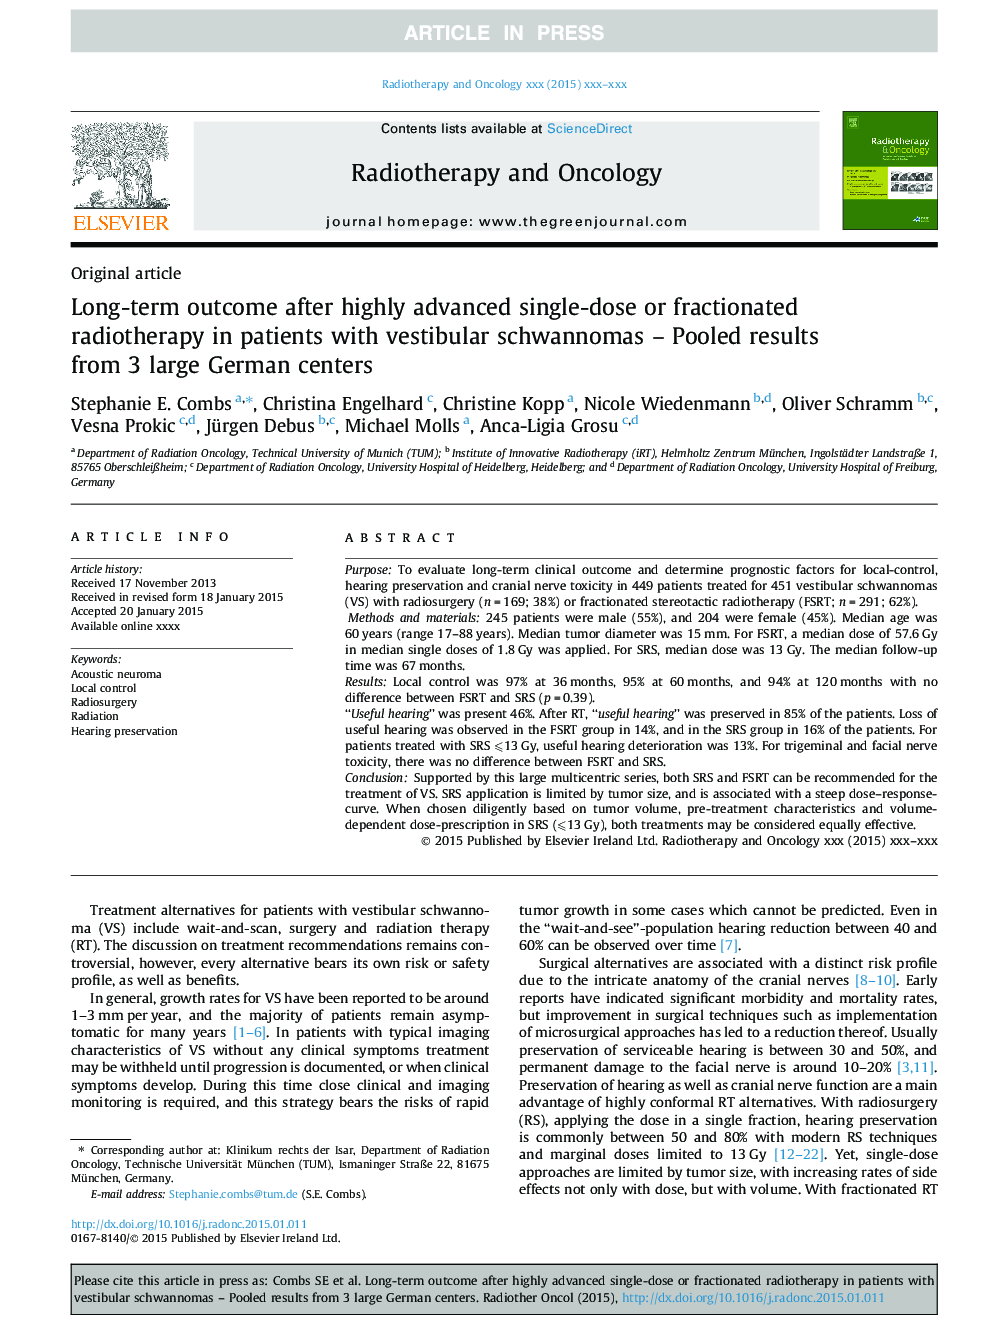 Long-term outcome after highly advanced single-dose or fractionated radiotherapy in patients with vestibular schwannomas - Pooled results from 3 large German centers